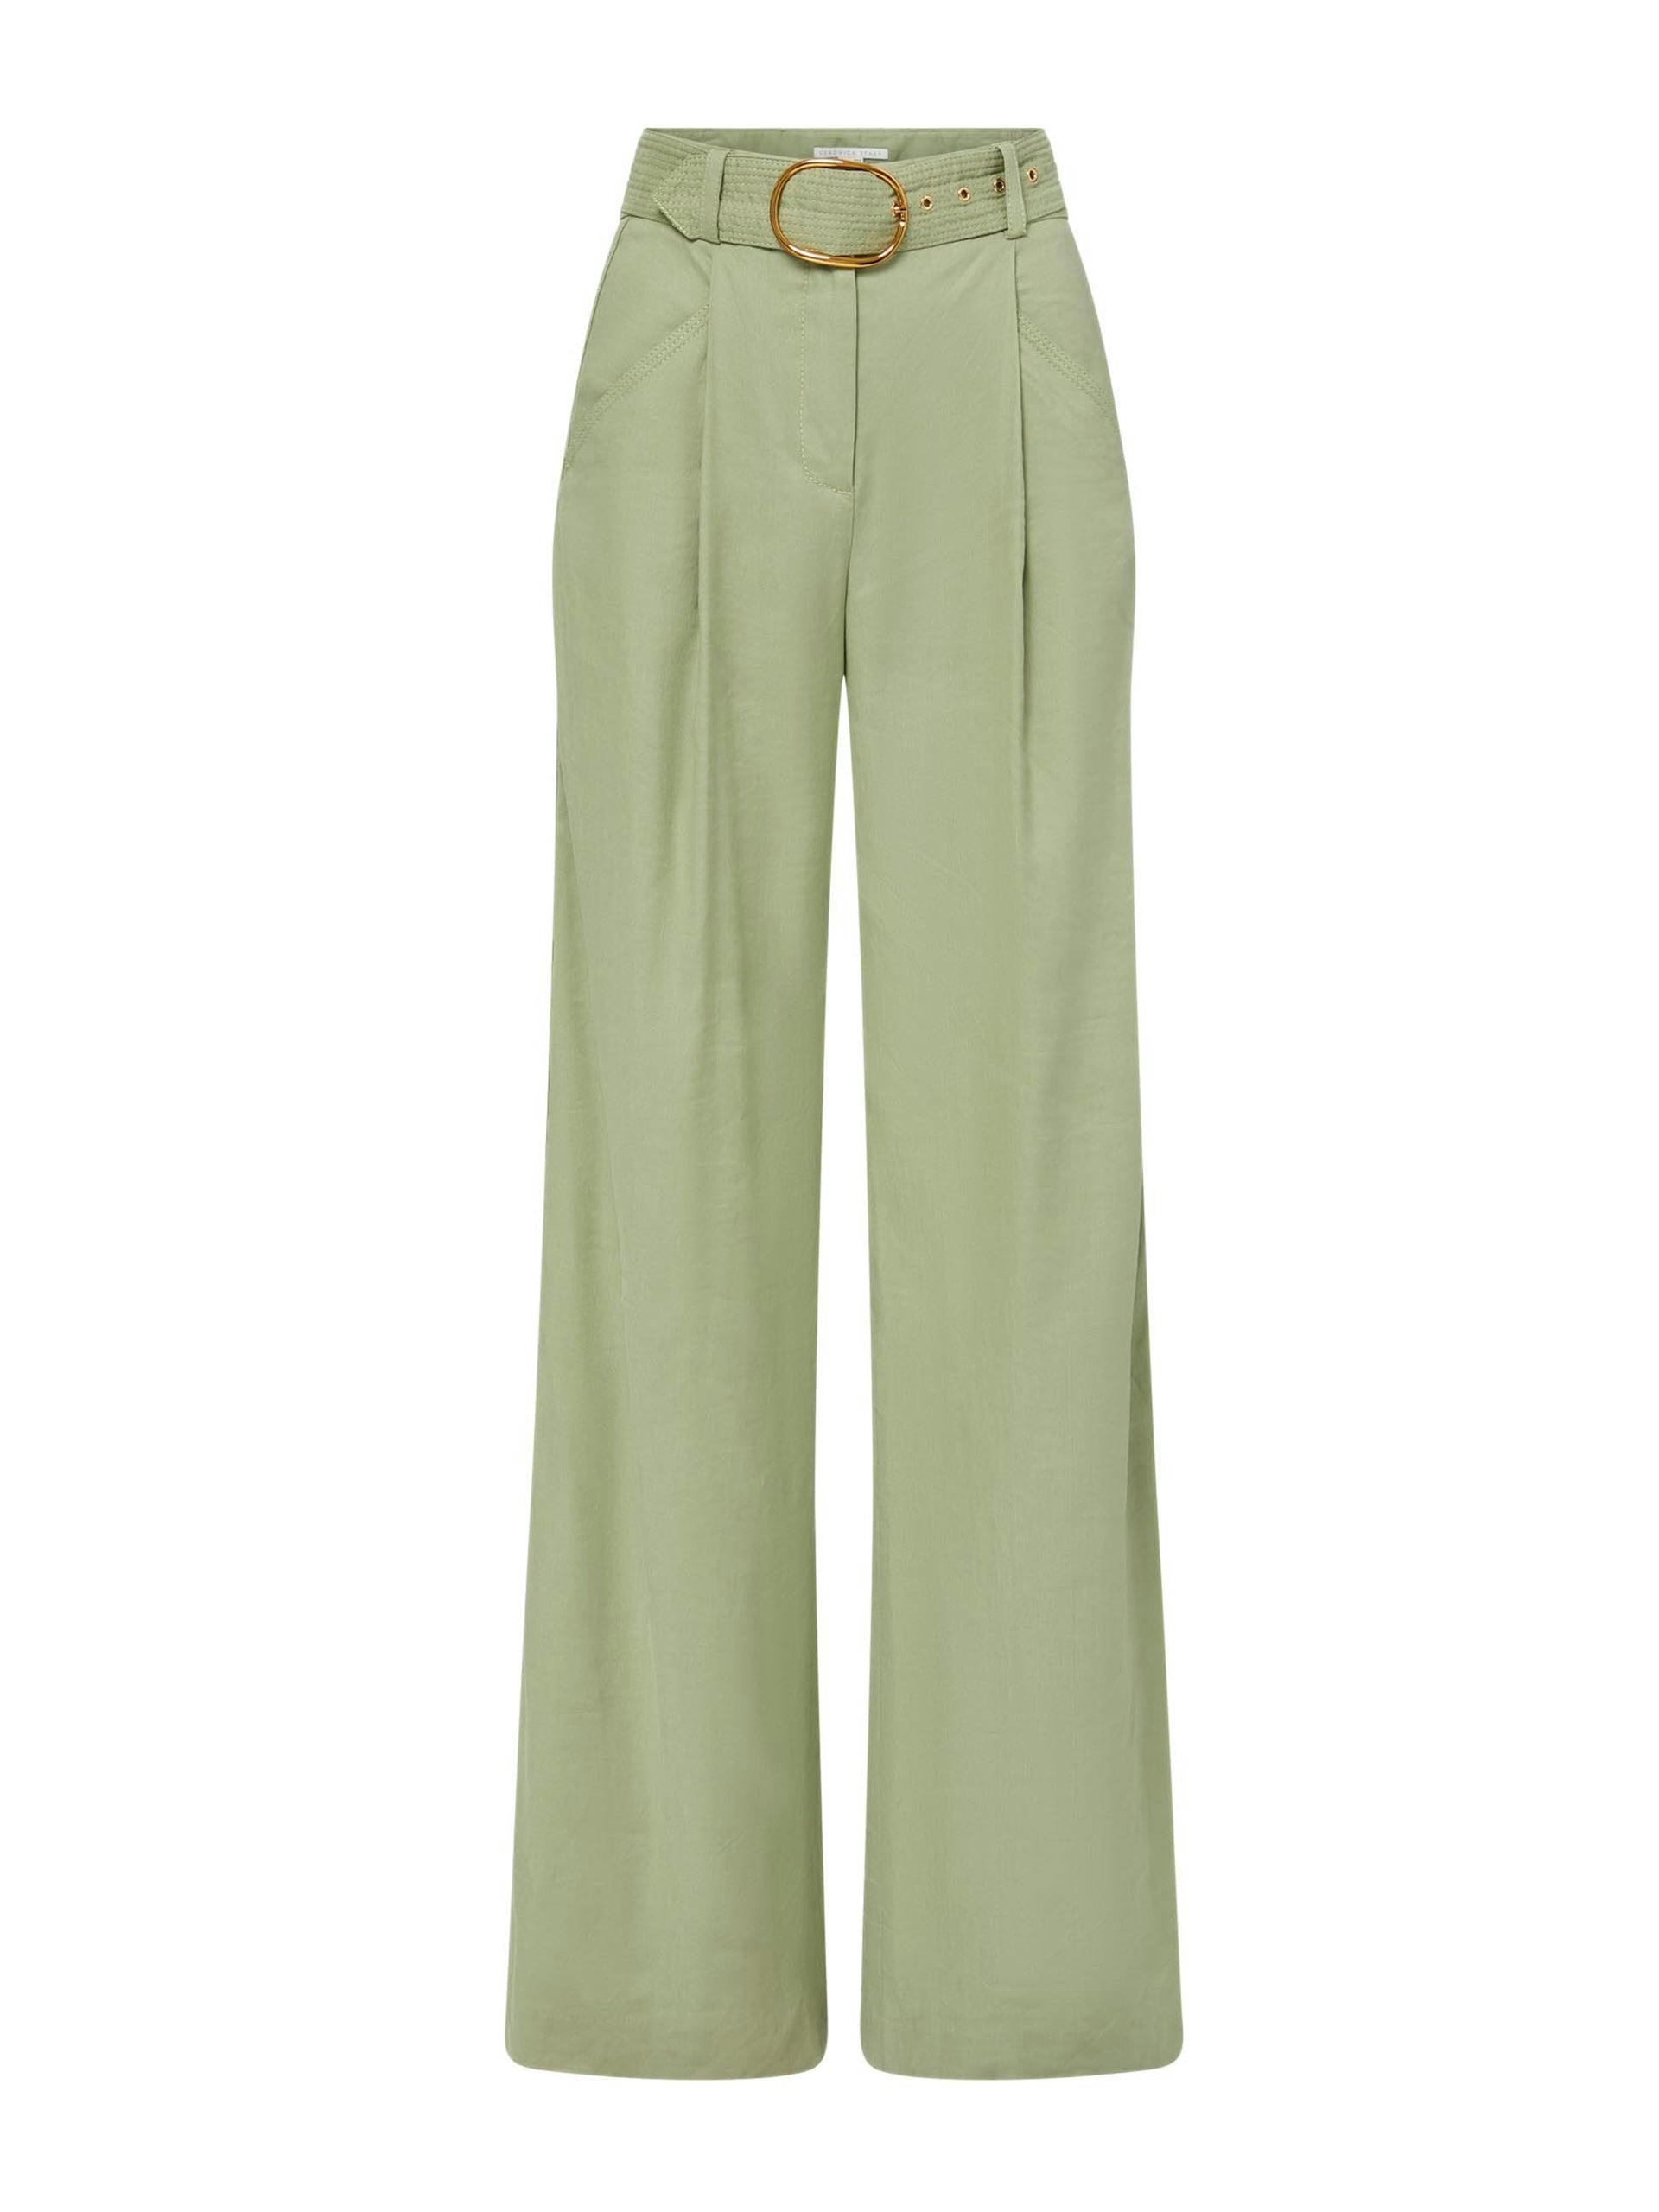 Pale green trousers